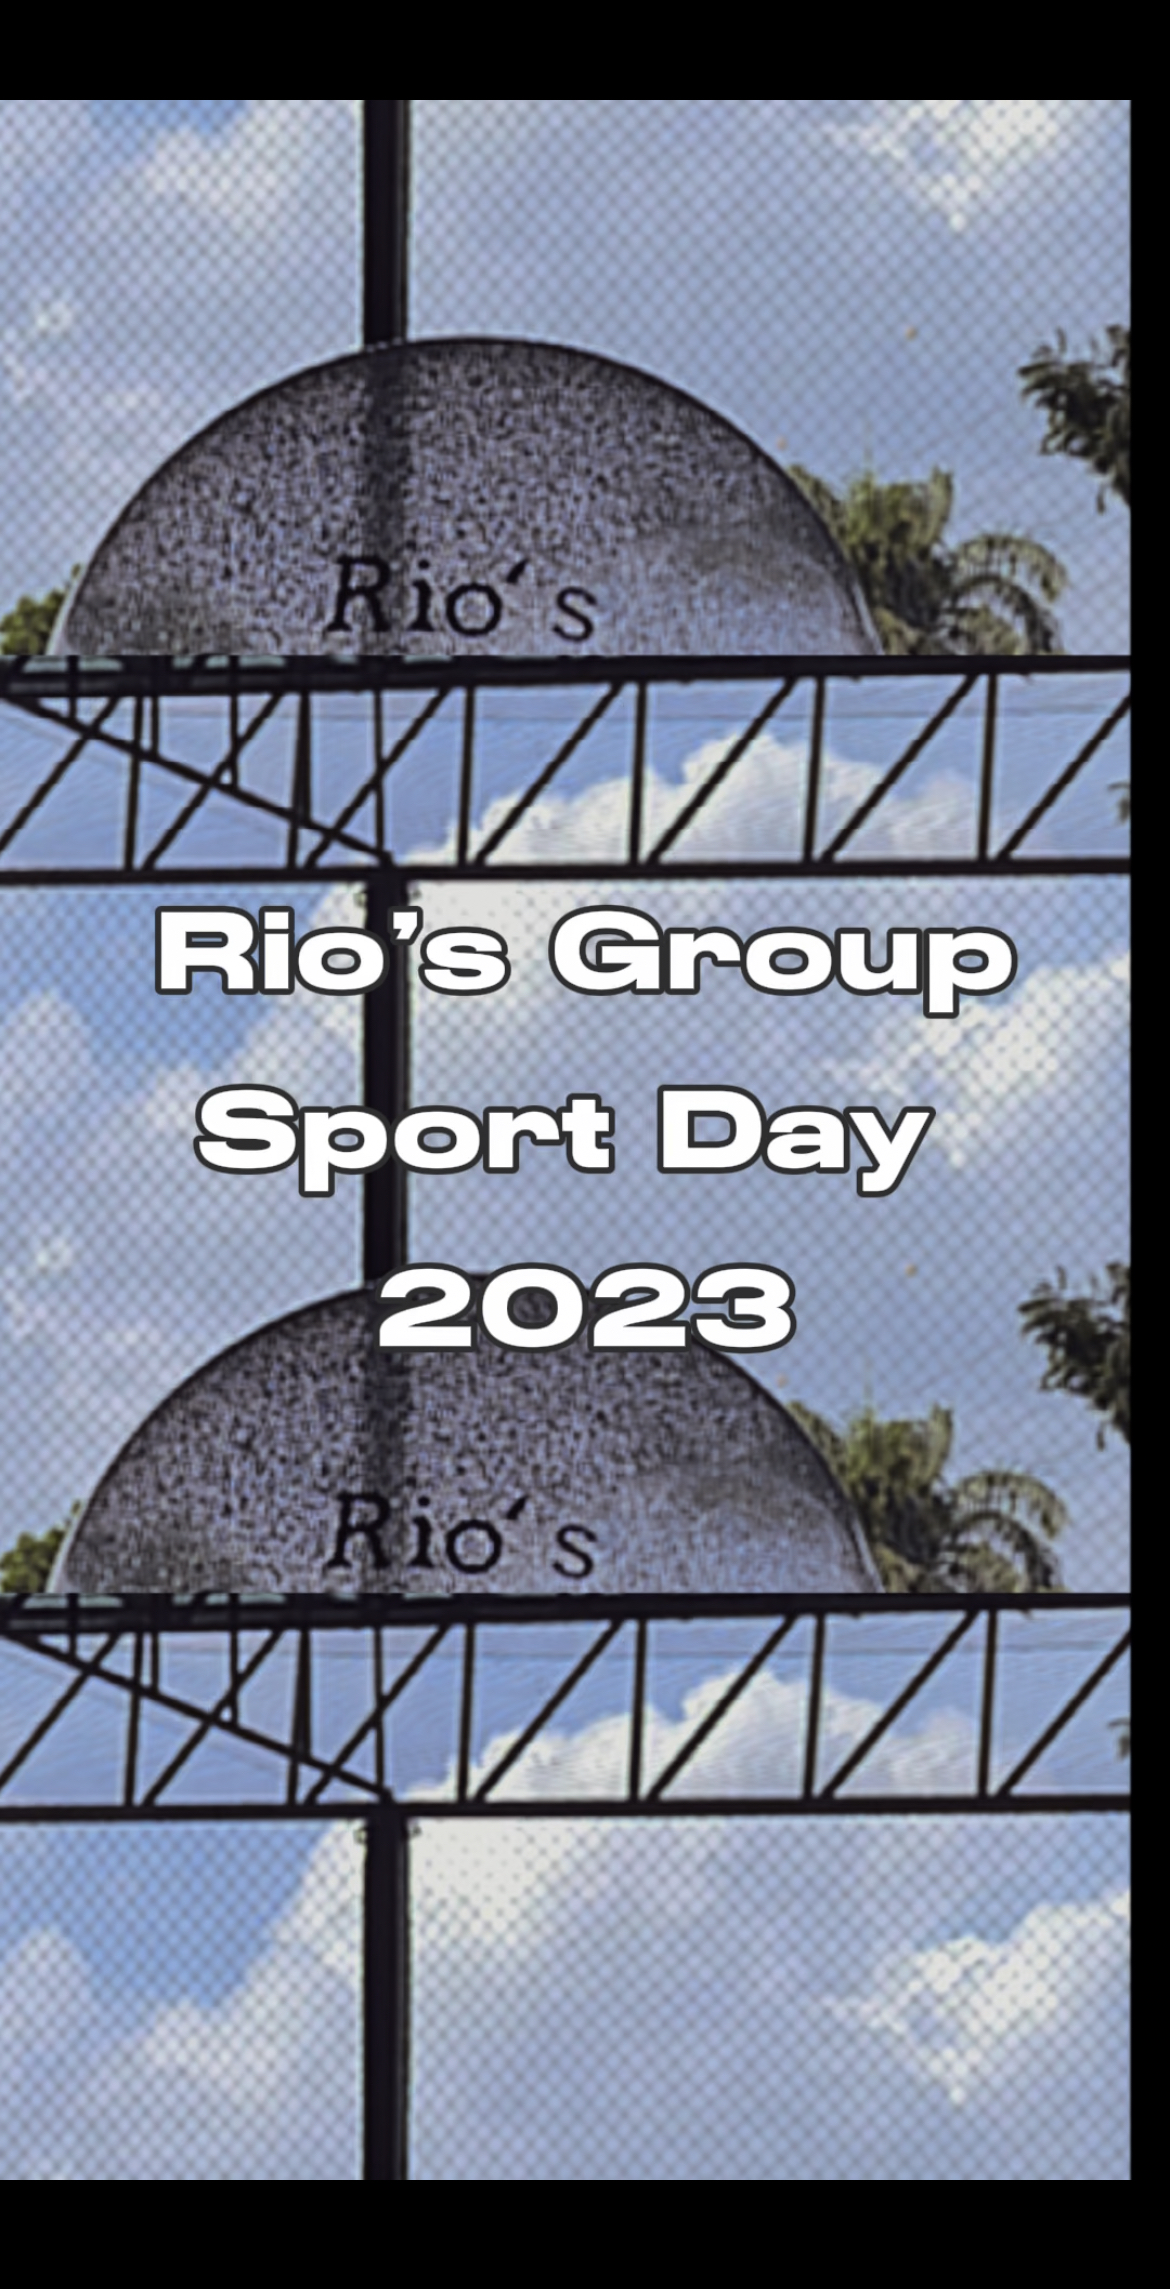 Rio's group sport day 2023 🏆 By Rio's group